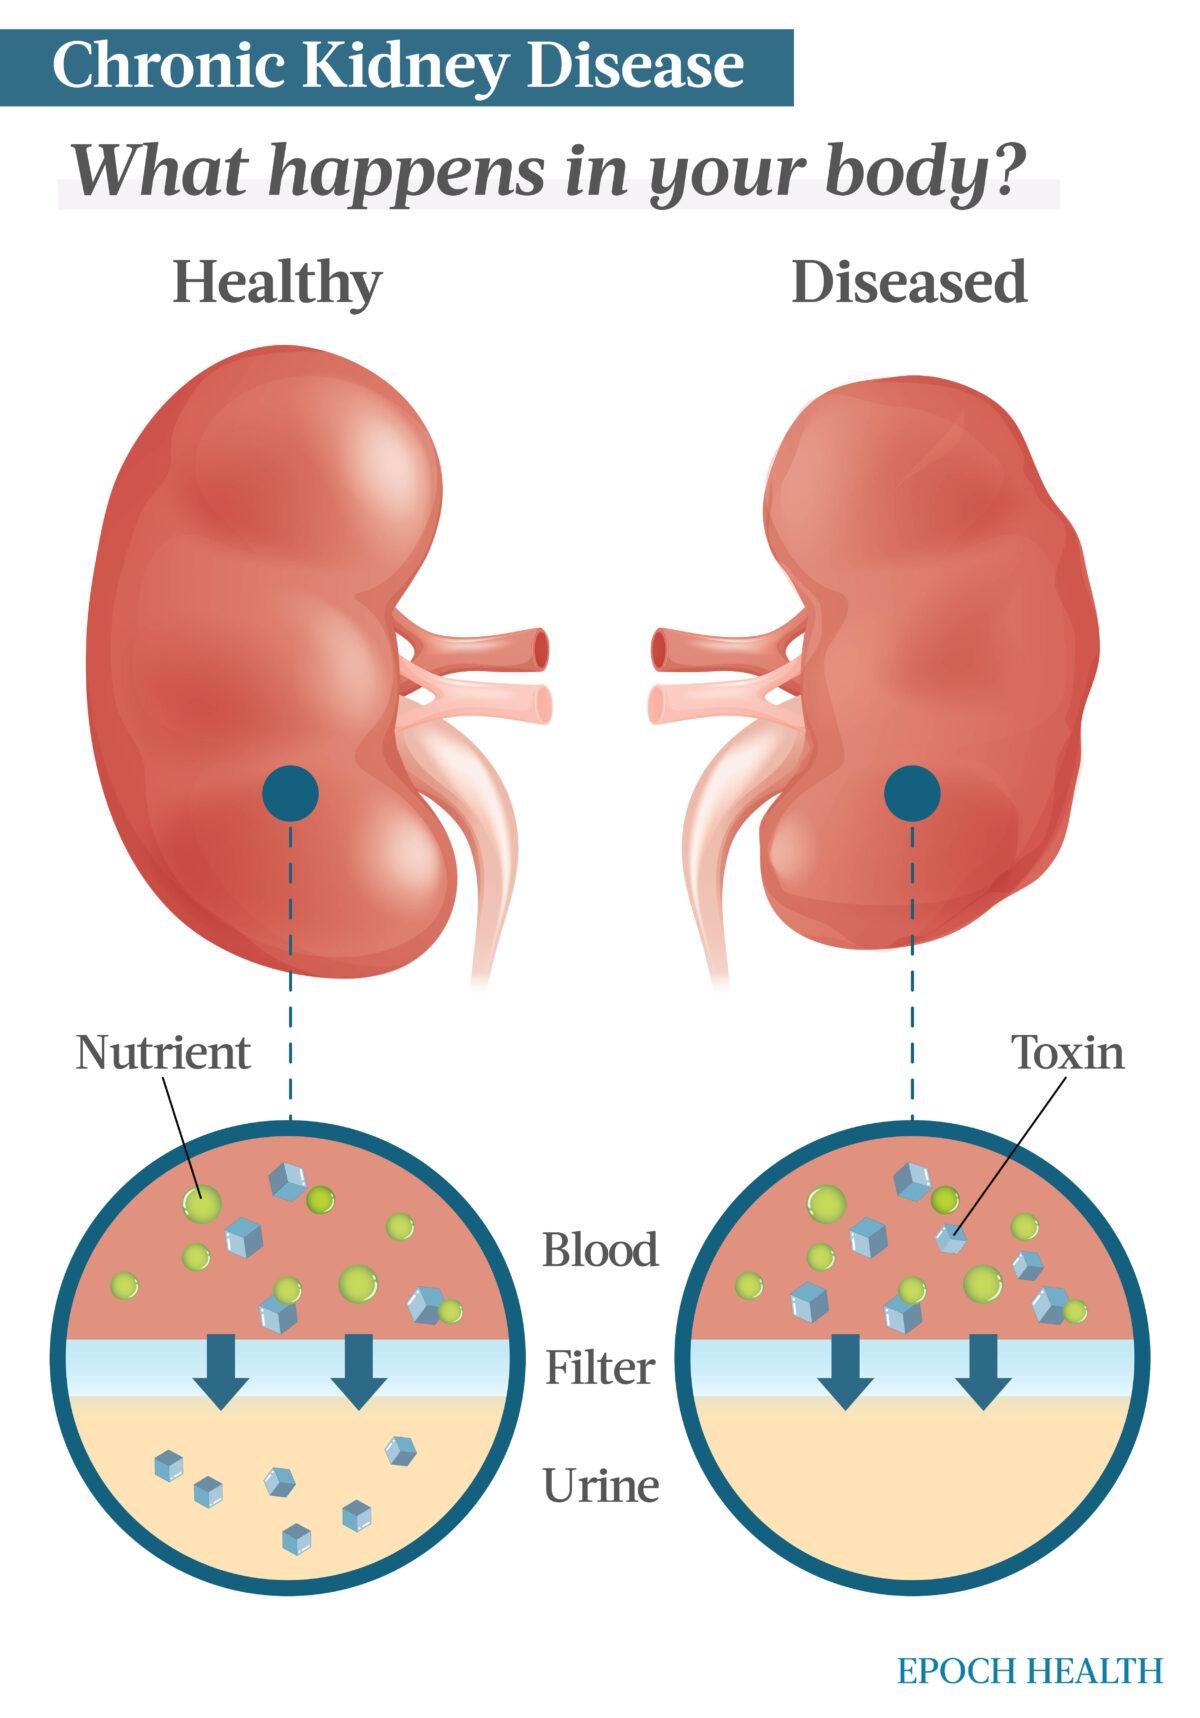 Kidney disease is the result of the kidneys not being able to properly filter waste from the body. It is most often caused by hypertension or diabetes. (The Epoch Times)